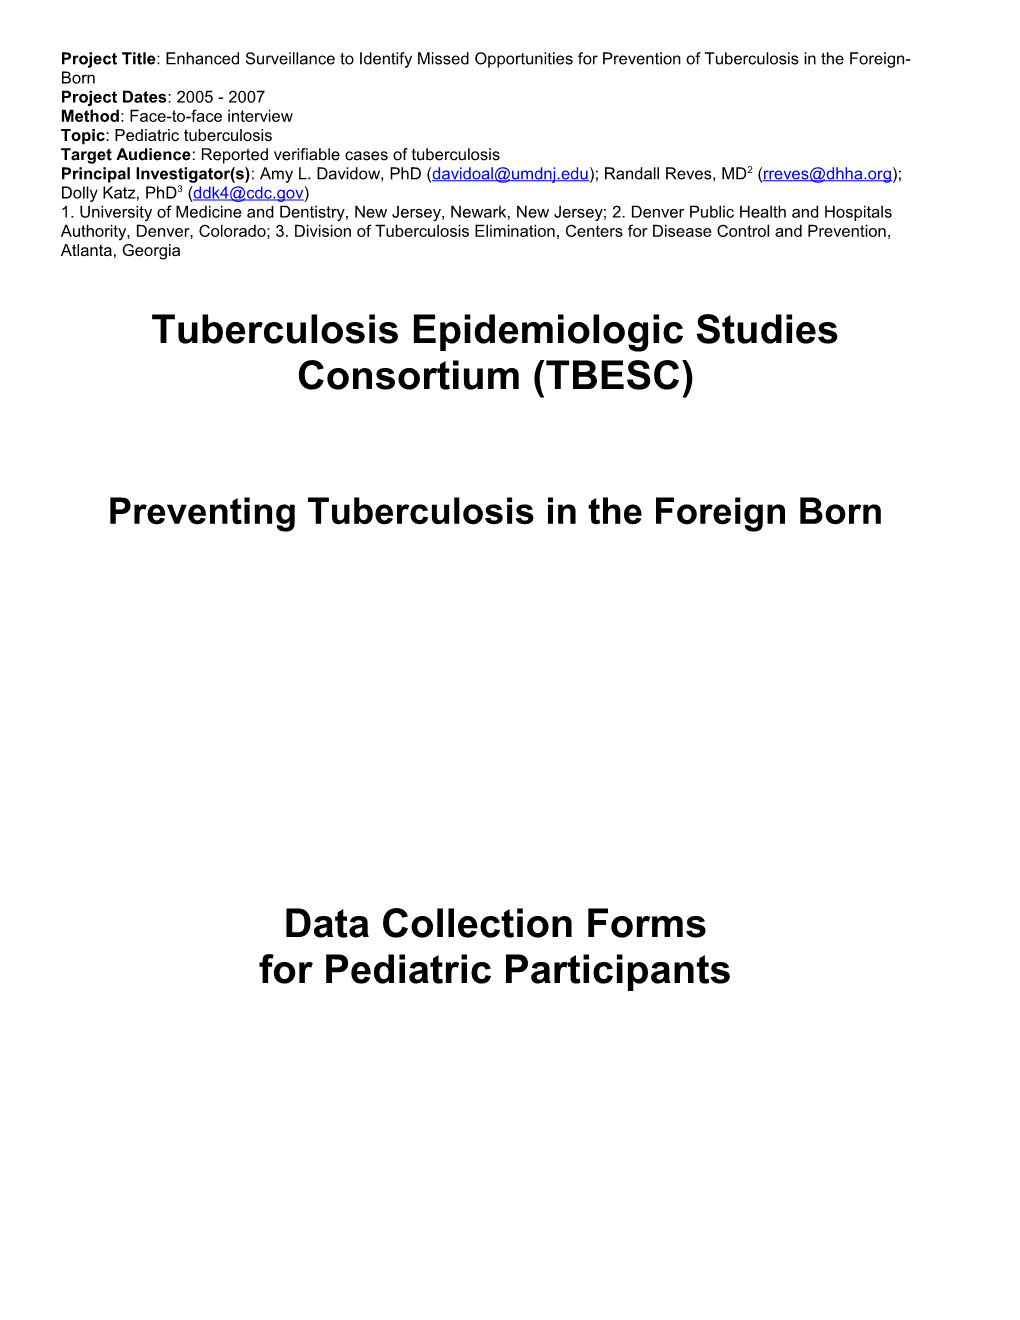 Task Order #9: Enhanced Surveillance of Tuberculosis in the Foreign-Born